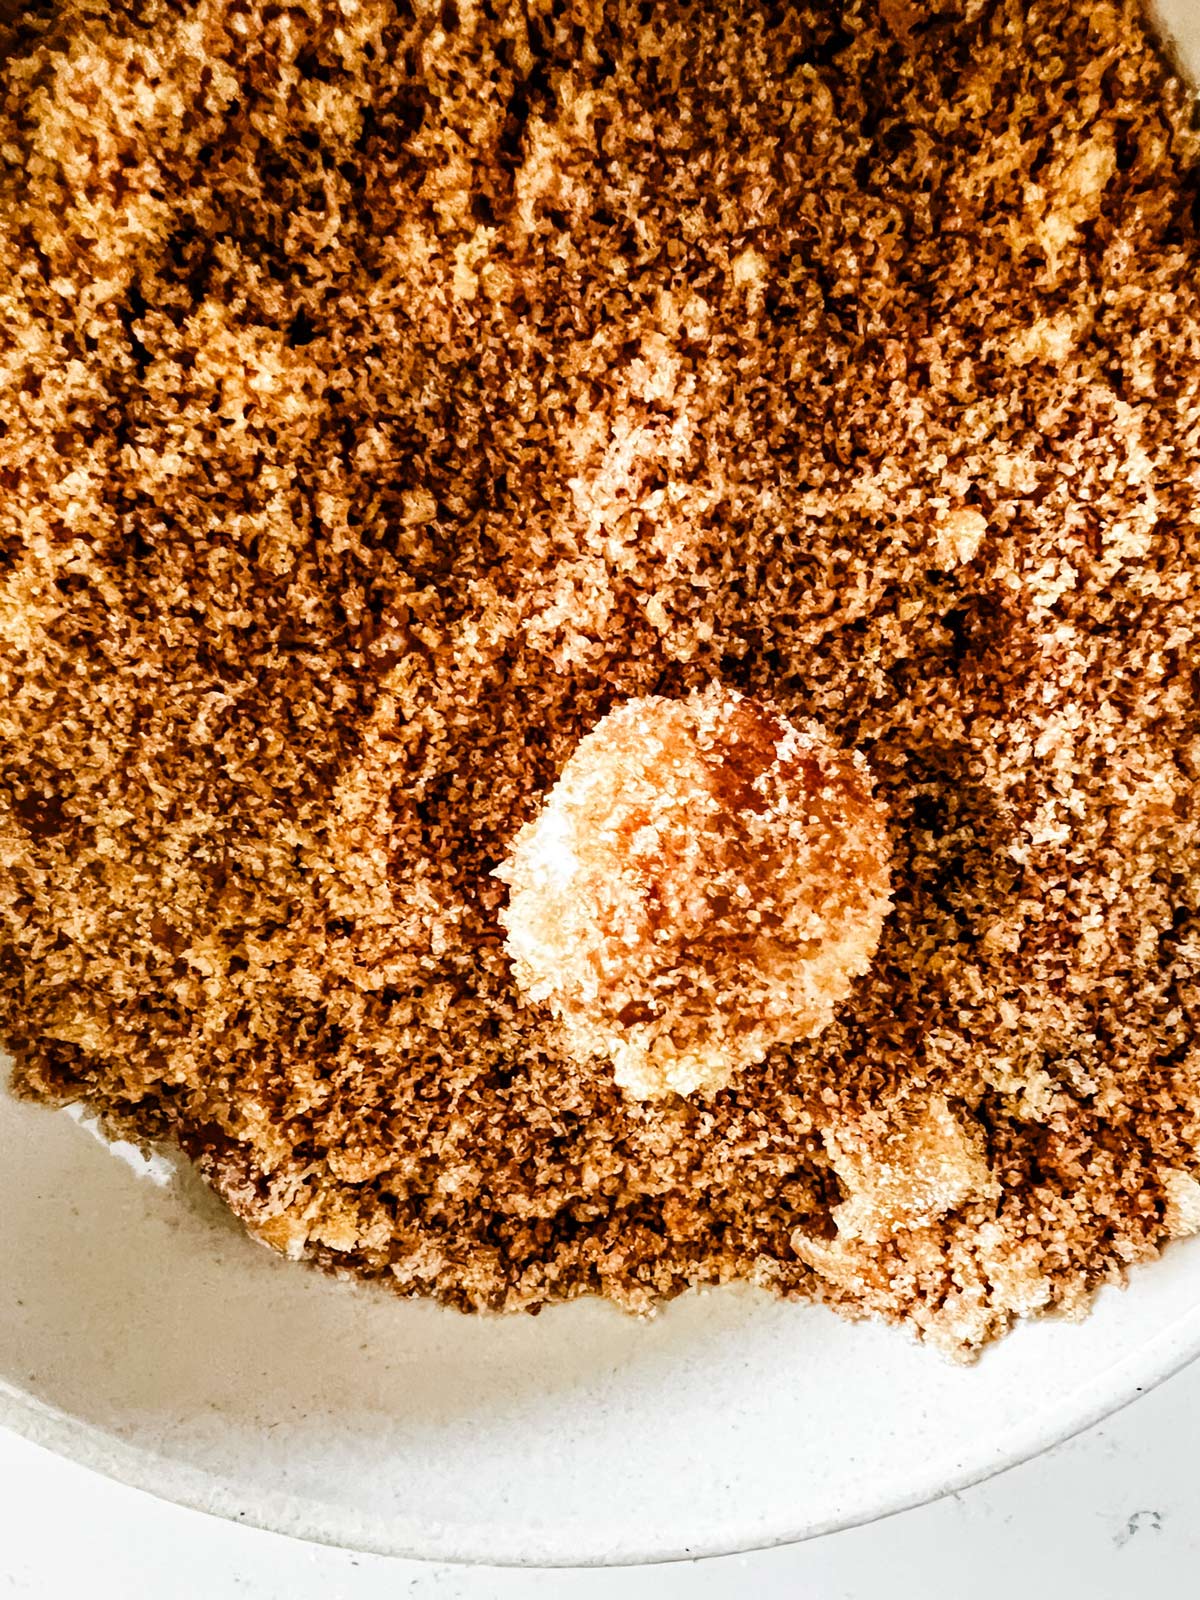 Monkey bread dough being tossed in a bowl of cinnamon sugar.